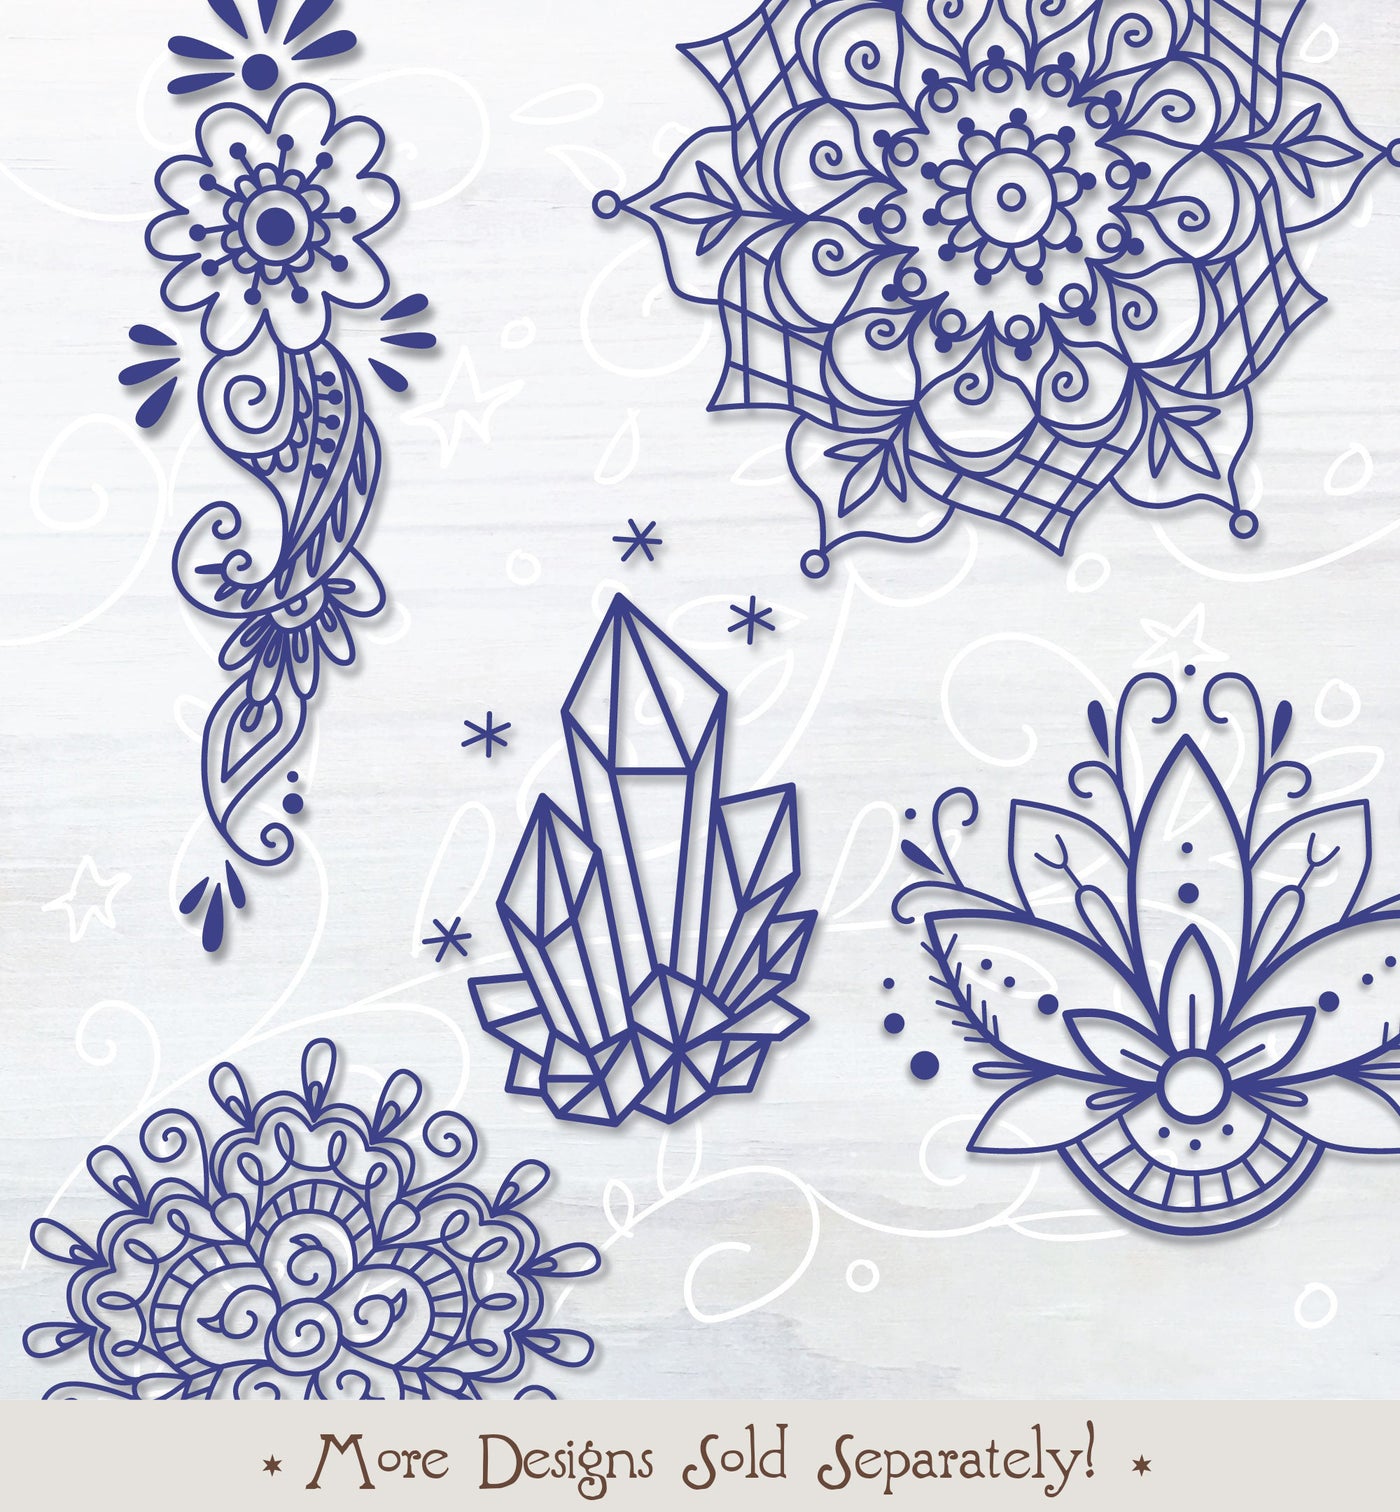 SVG Henna cut file for Cricut, Silhouette, PNG, JPG